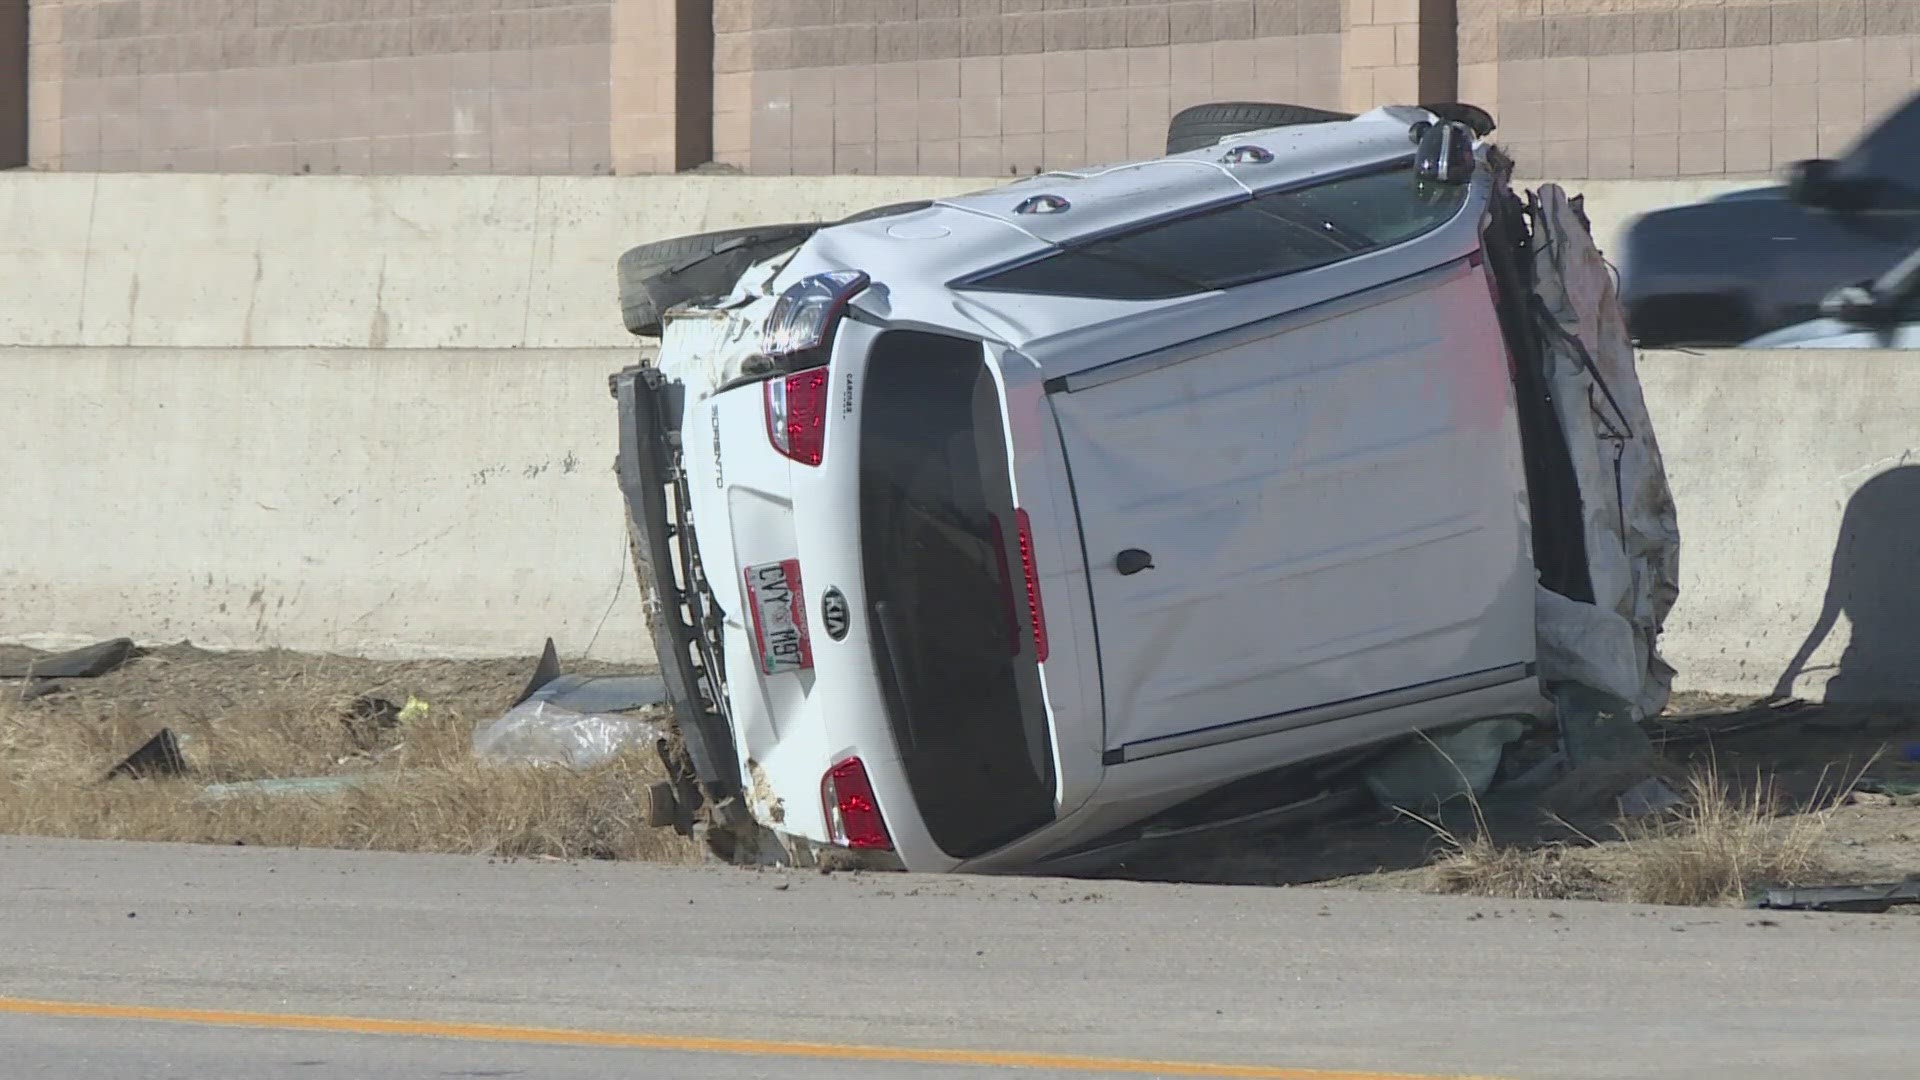 A teen who was driving a stolen SUV that crashed Saturday morning on Interstate 225 didn't have a license, Aurora Police said on Monday.